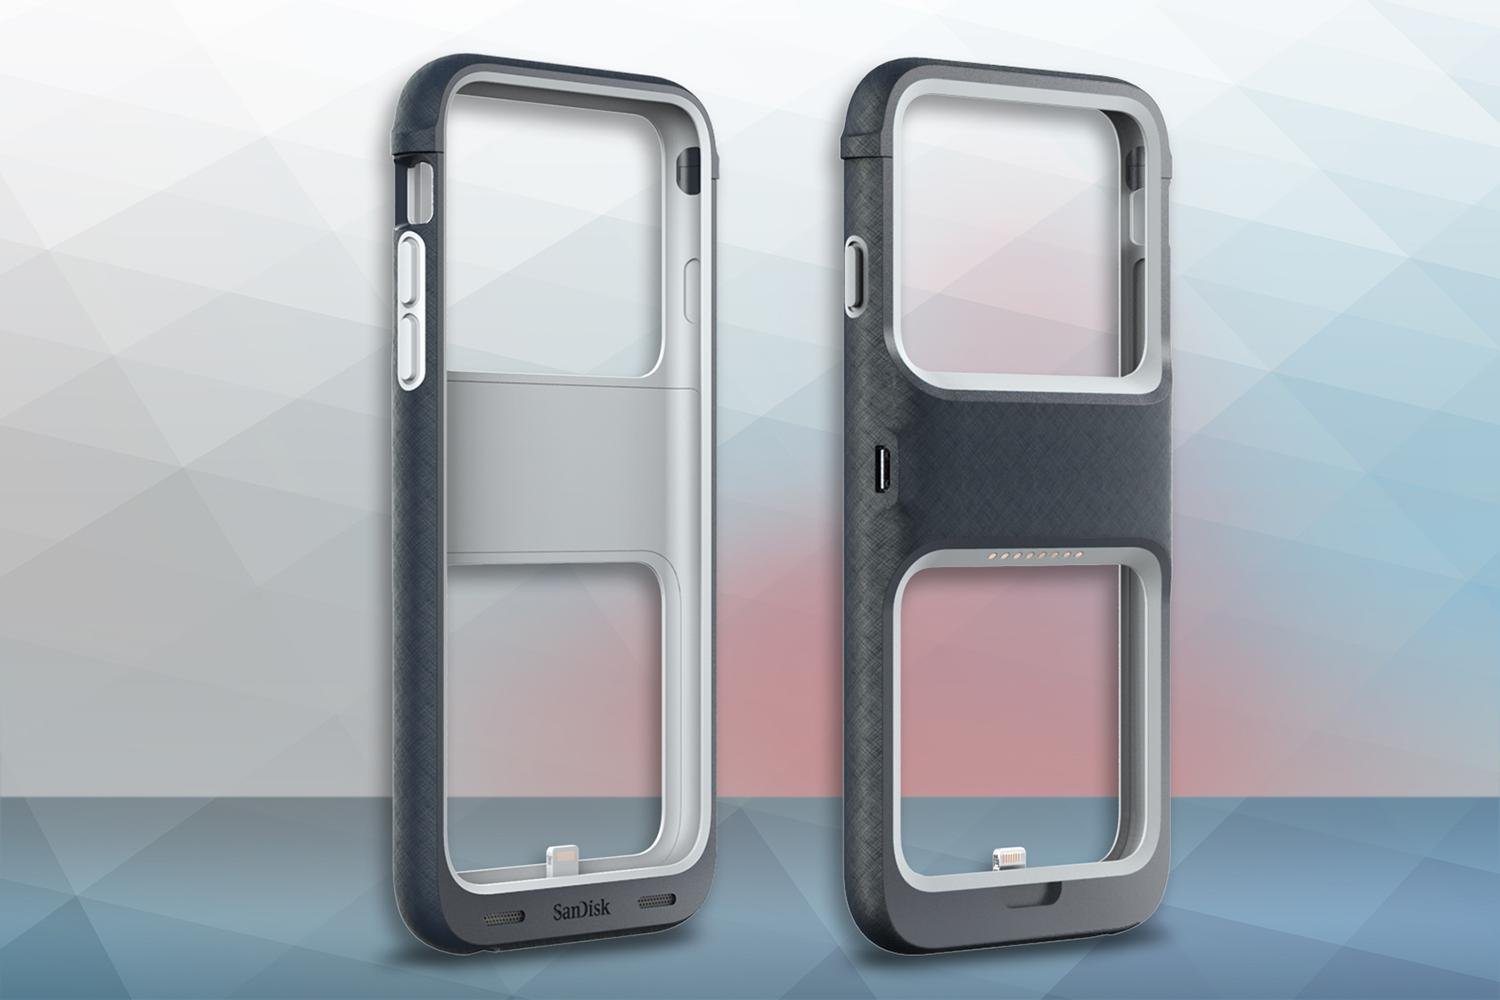 SanDisk iXpand Memory Case protects your iPhone and increase its storage too